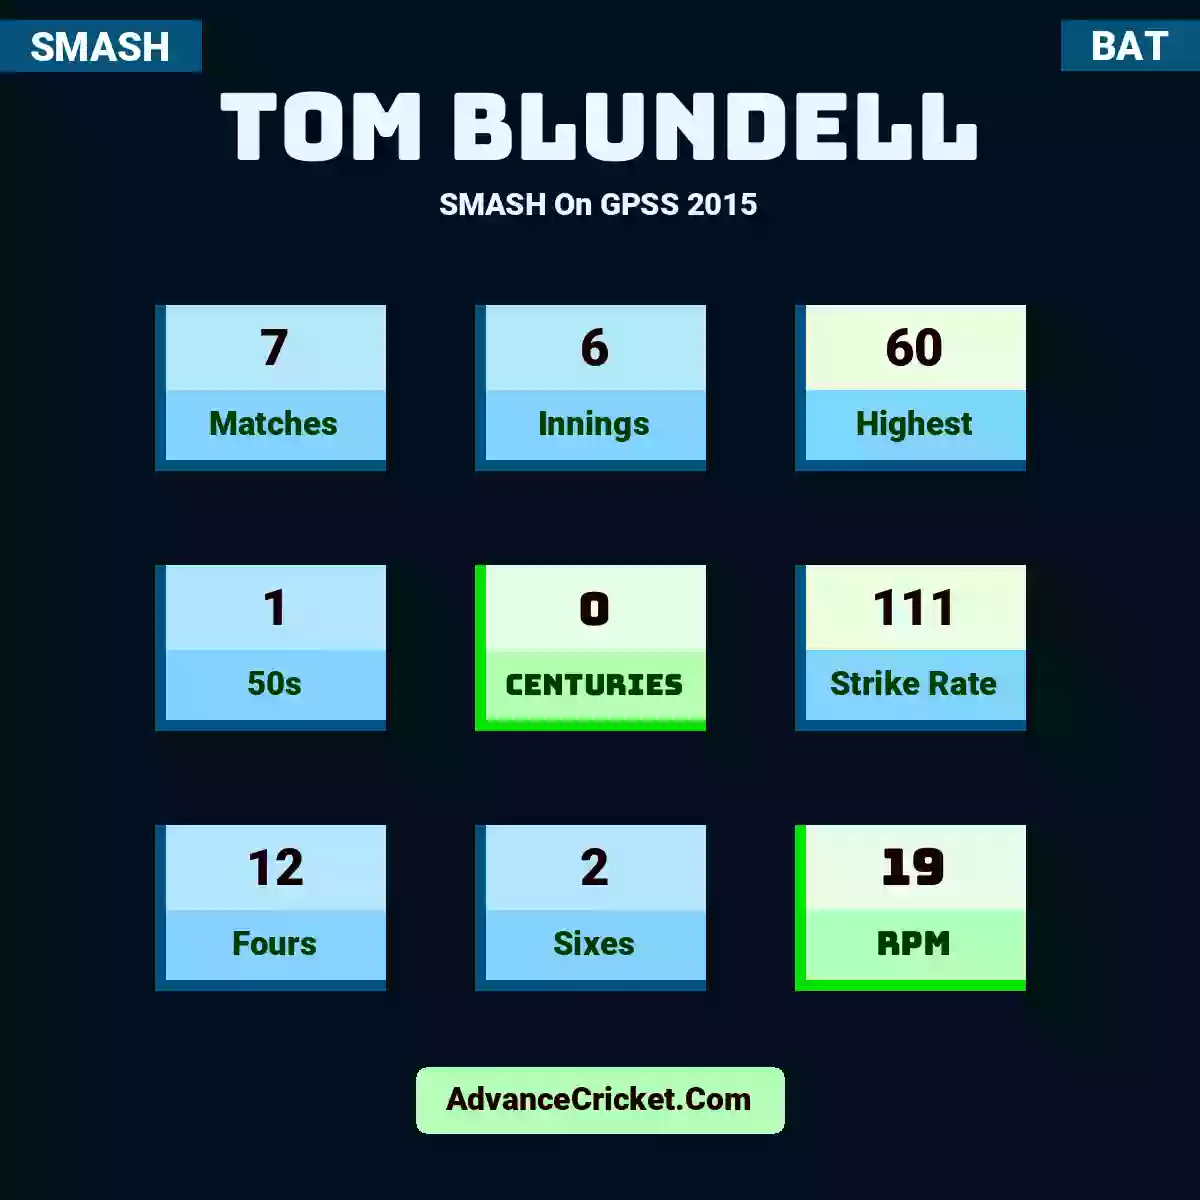 Tom Blundell SMASH  On GPSS 2015, Tom Blundell played 7 matches, scored 60 runs as highest, 1 half-centuries, and 0 centuries, with a strike rate of 111. T.Blundell hit 12 fours and 2 sixes, with an RPM of 19.